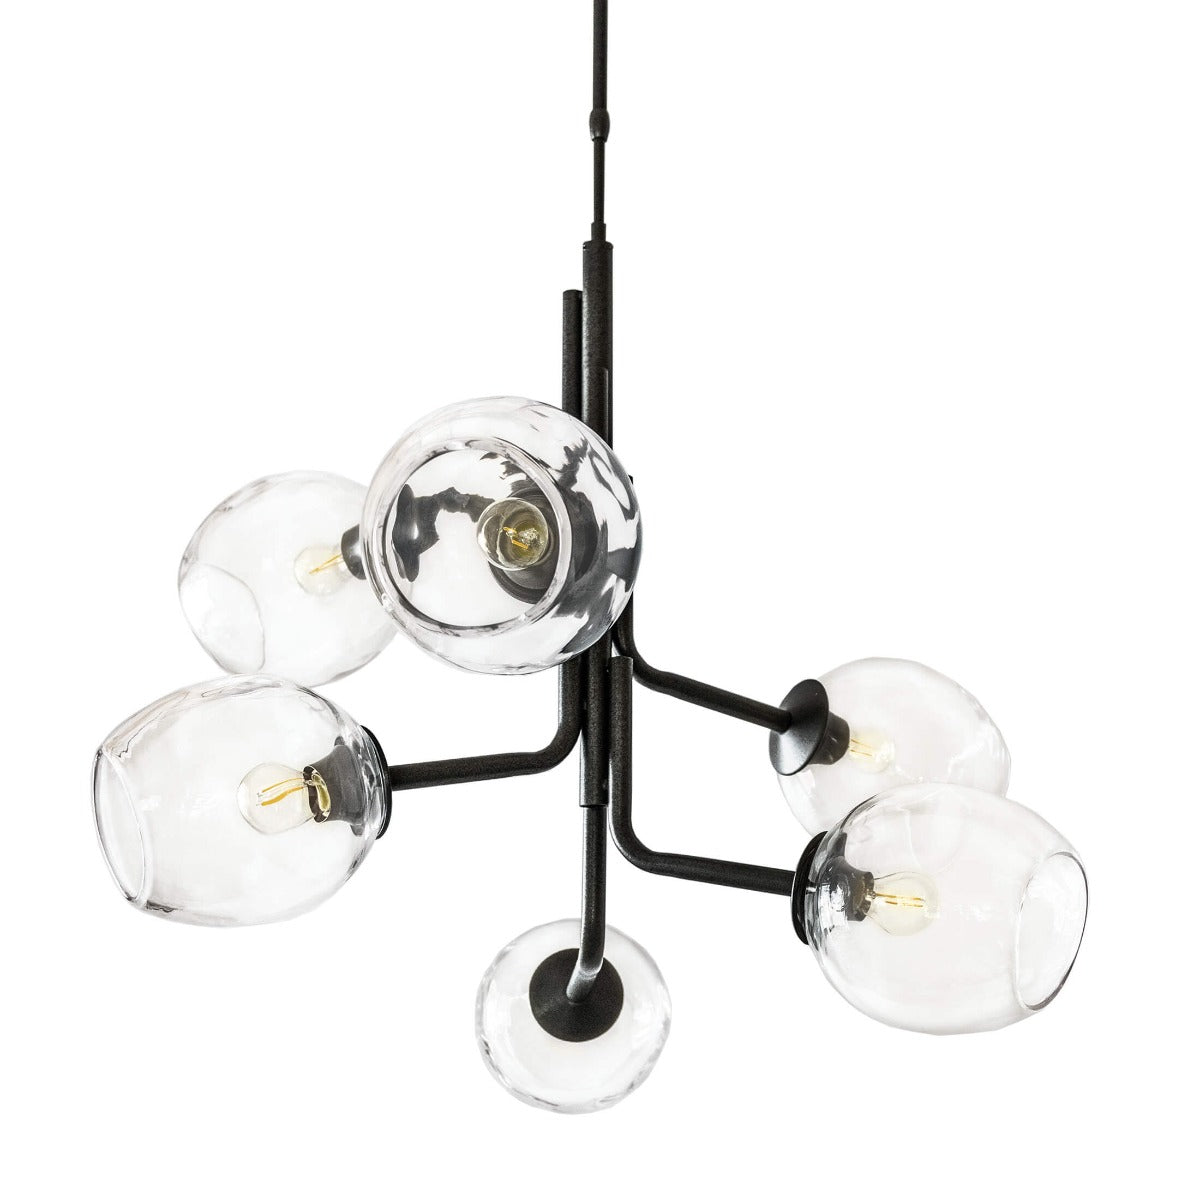 Caledonia Chandelier with 6 Globes – Black